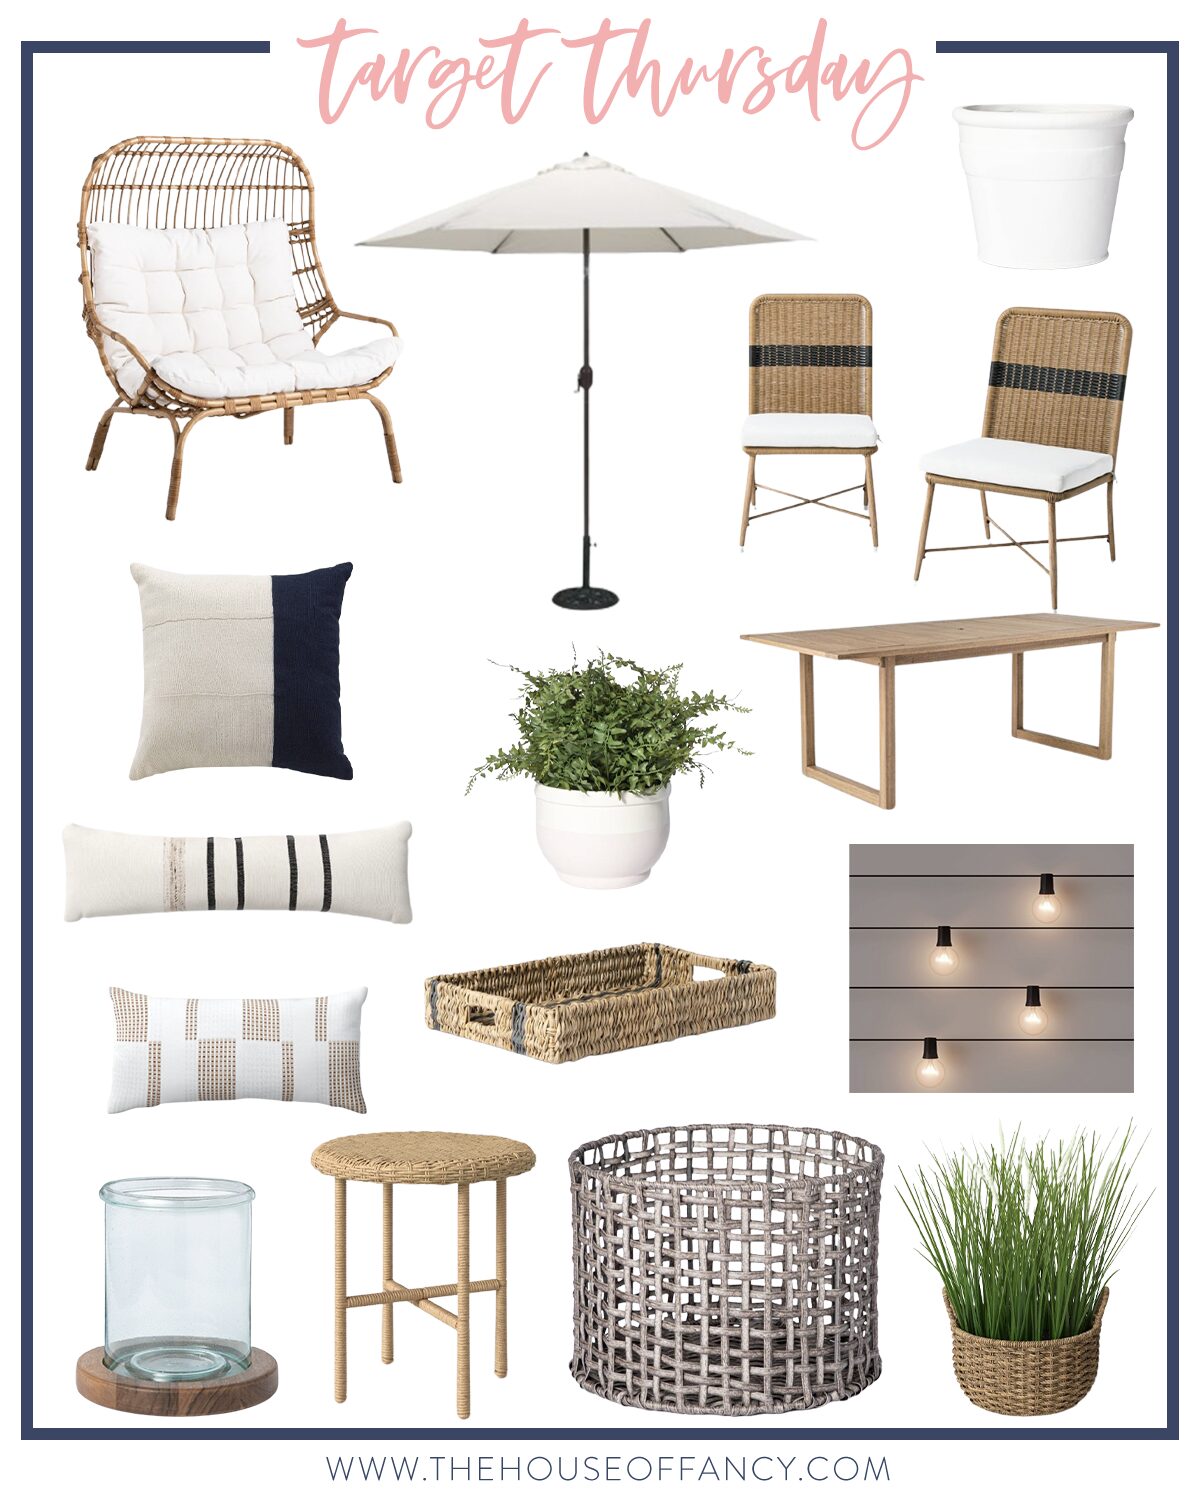 Target Thursday by popular Houston life and style blog, The House of Fancy: collage image of outdoor pillows, outdoor rattan wicker chairs, outdoor white umbrella, outdoor wicker tray, outdoor white planter, outdoor table, outdoor bistro lights, outdoor plant, outdoor egg chair, and outdoor woven basket. 